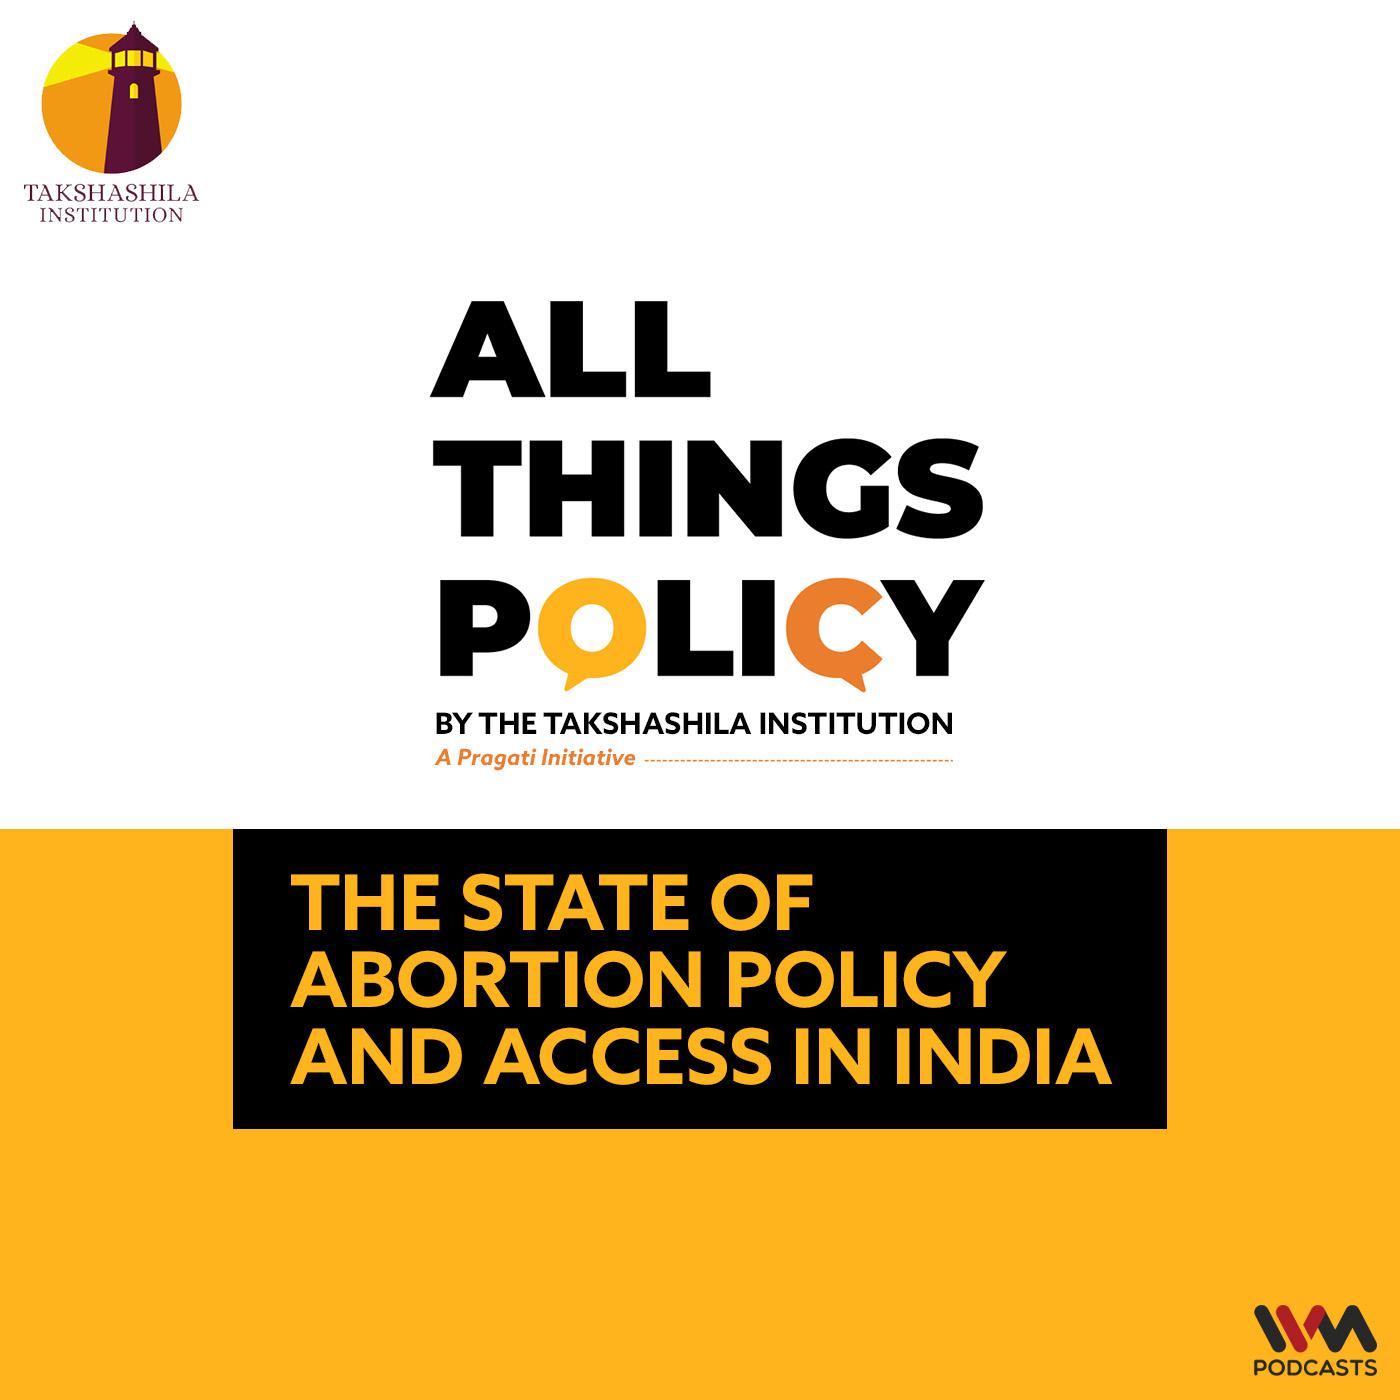 The State of abortion policy and access in India